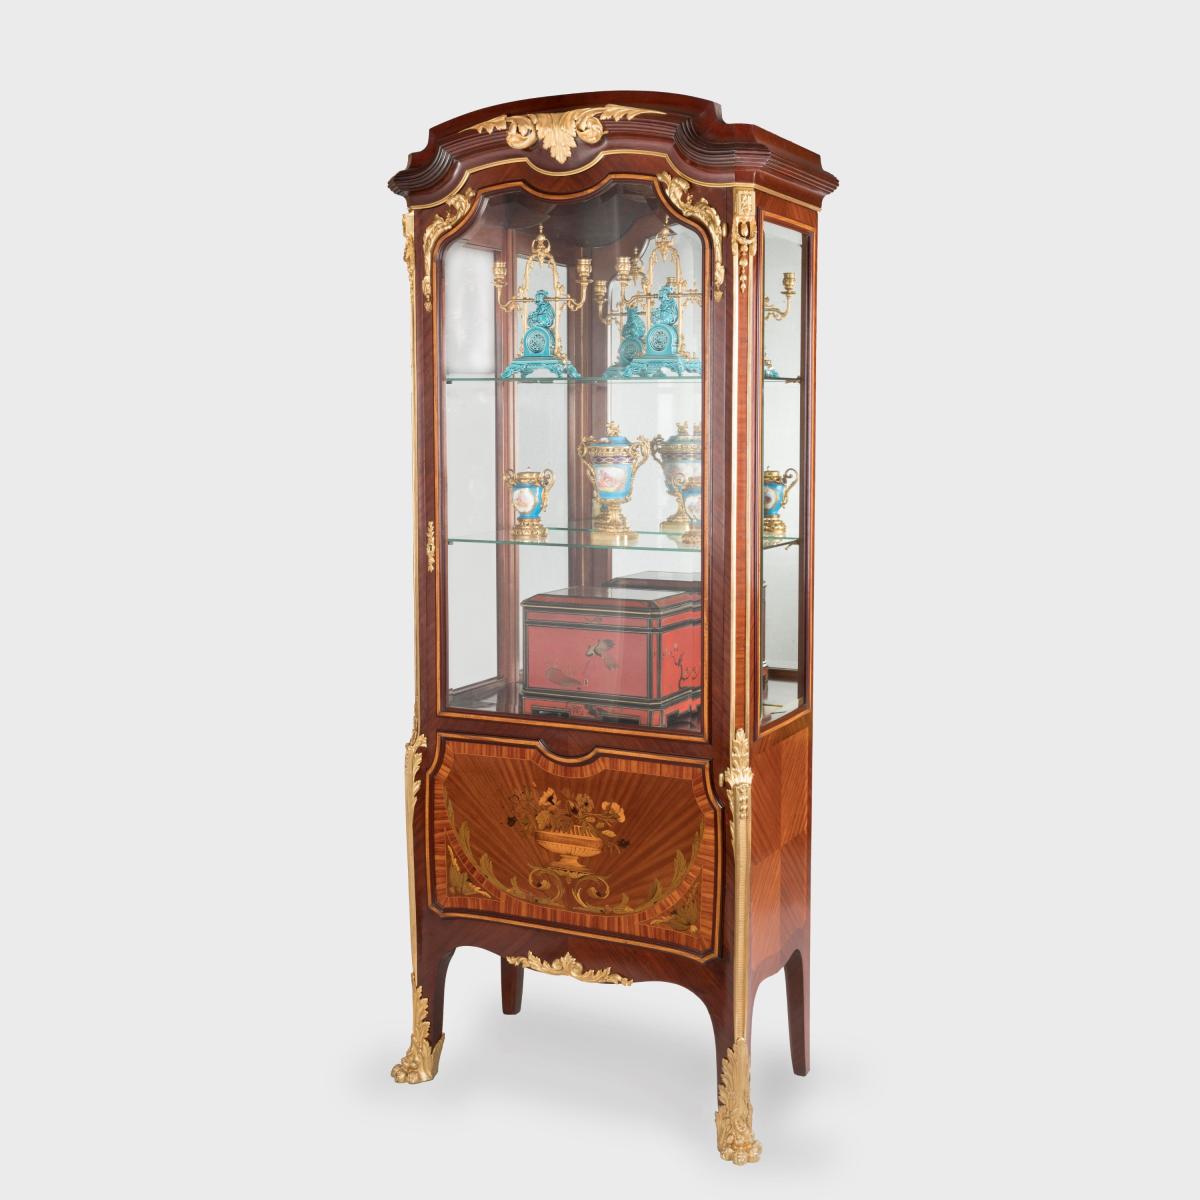 A Pair of Marquetry Display Cabinets By Edmund Kahn